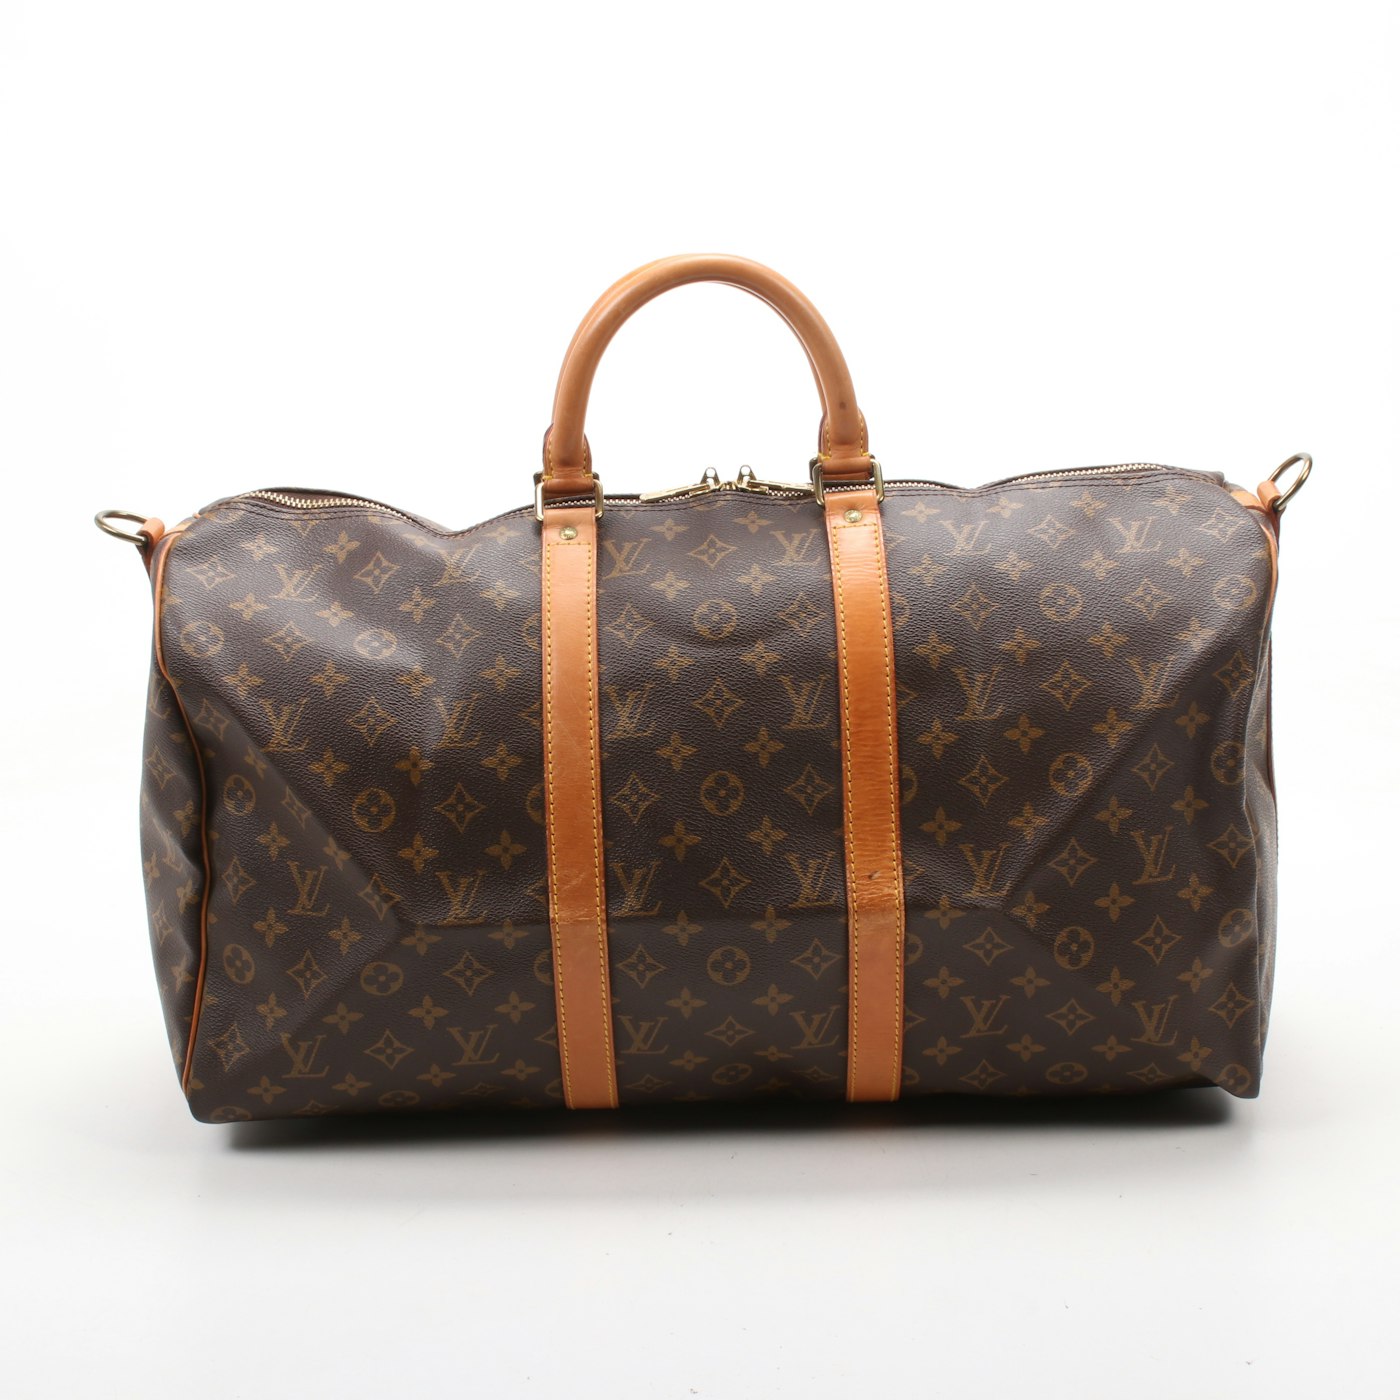 Louis Vuitton Keepall Bandoulière 50 Duffle Bag in Monogram Canvas and Leather | EBTH